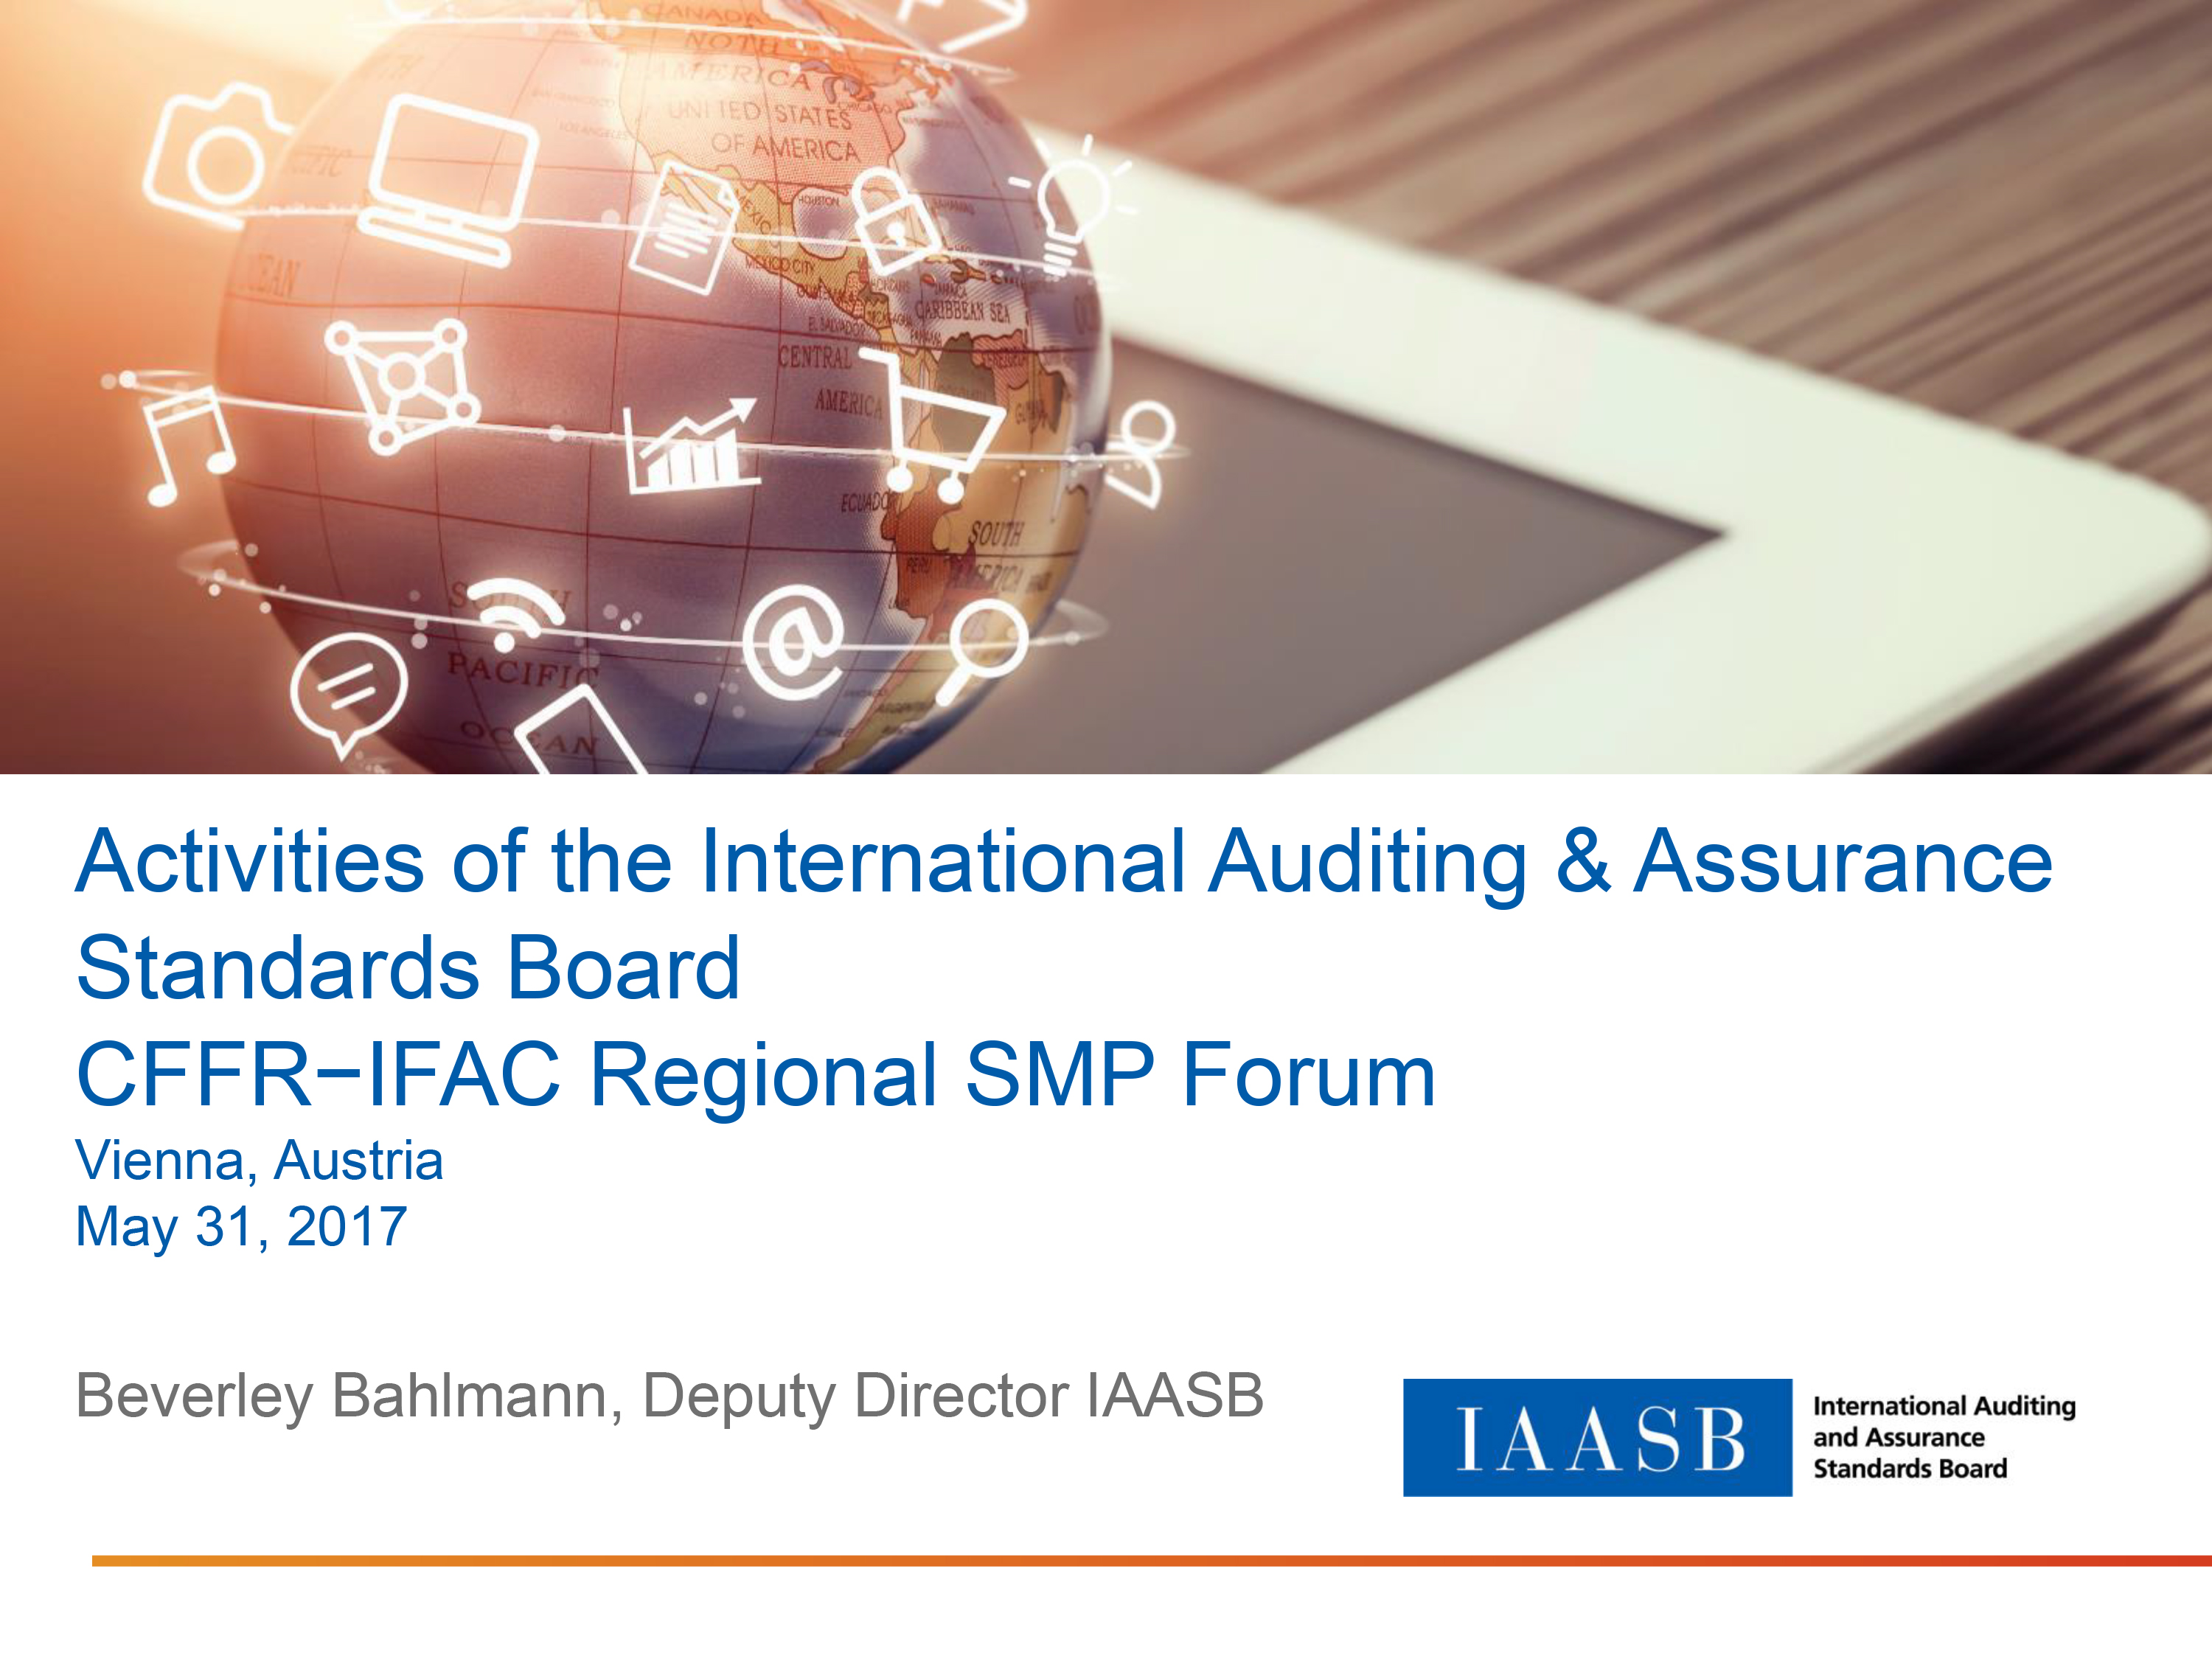 Activities of the International Auditing & Assurance Standards Board